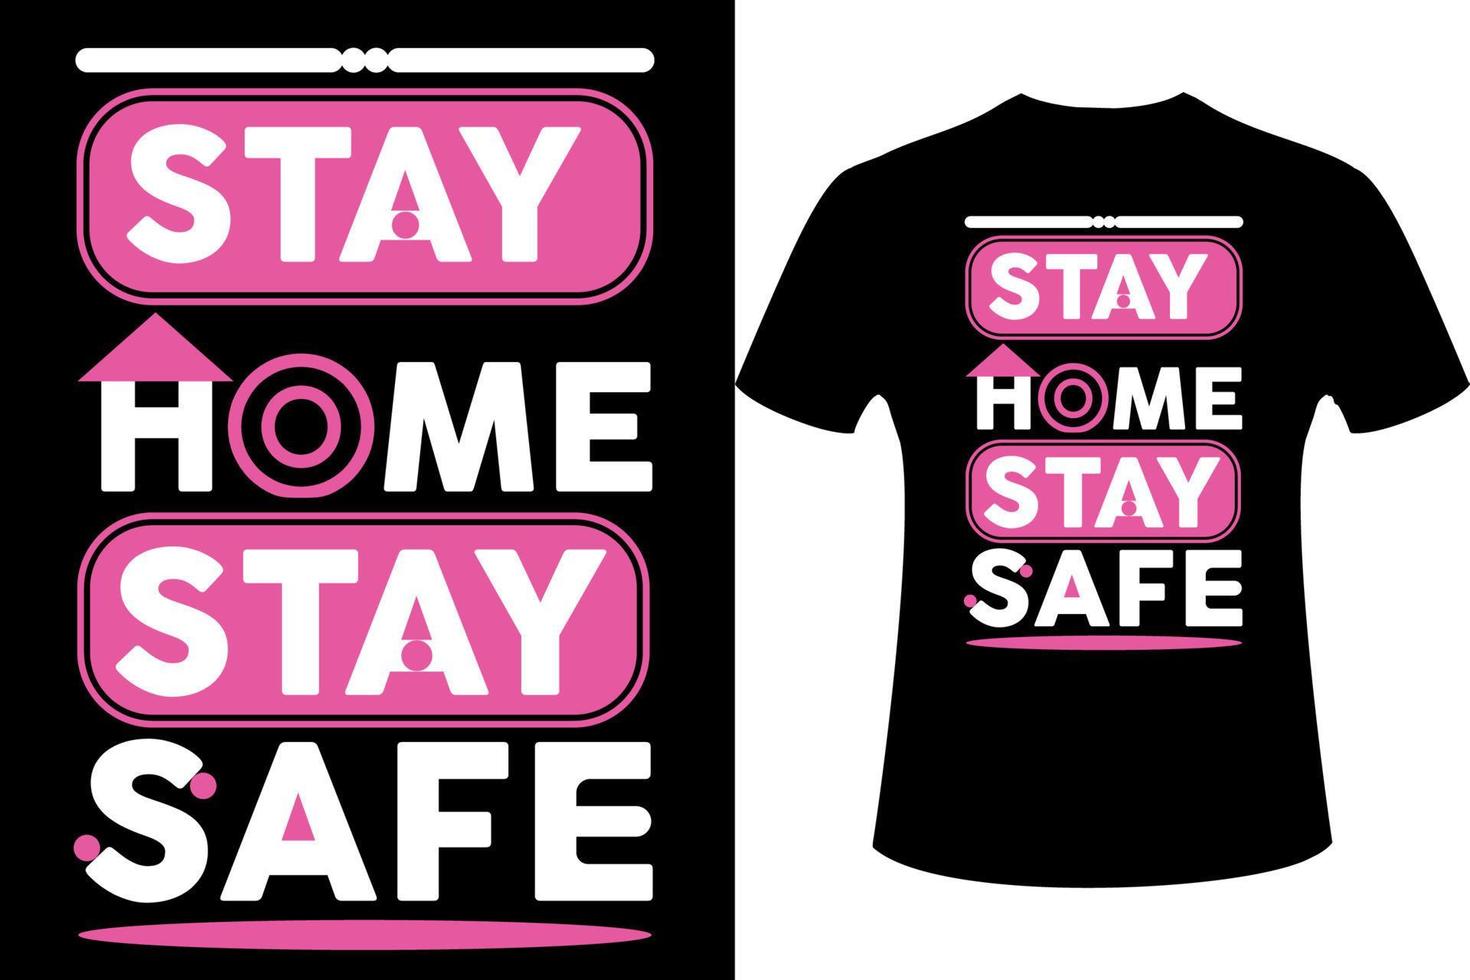 Stay home stay safe corona slogan typography t-shirt design. vector